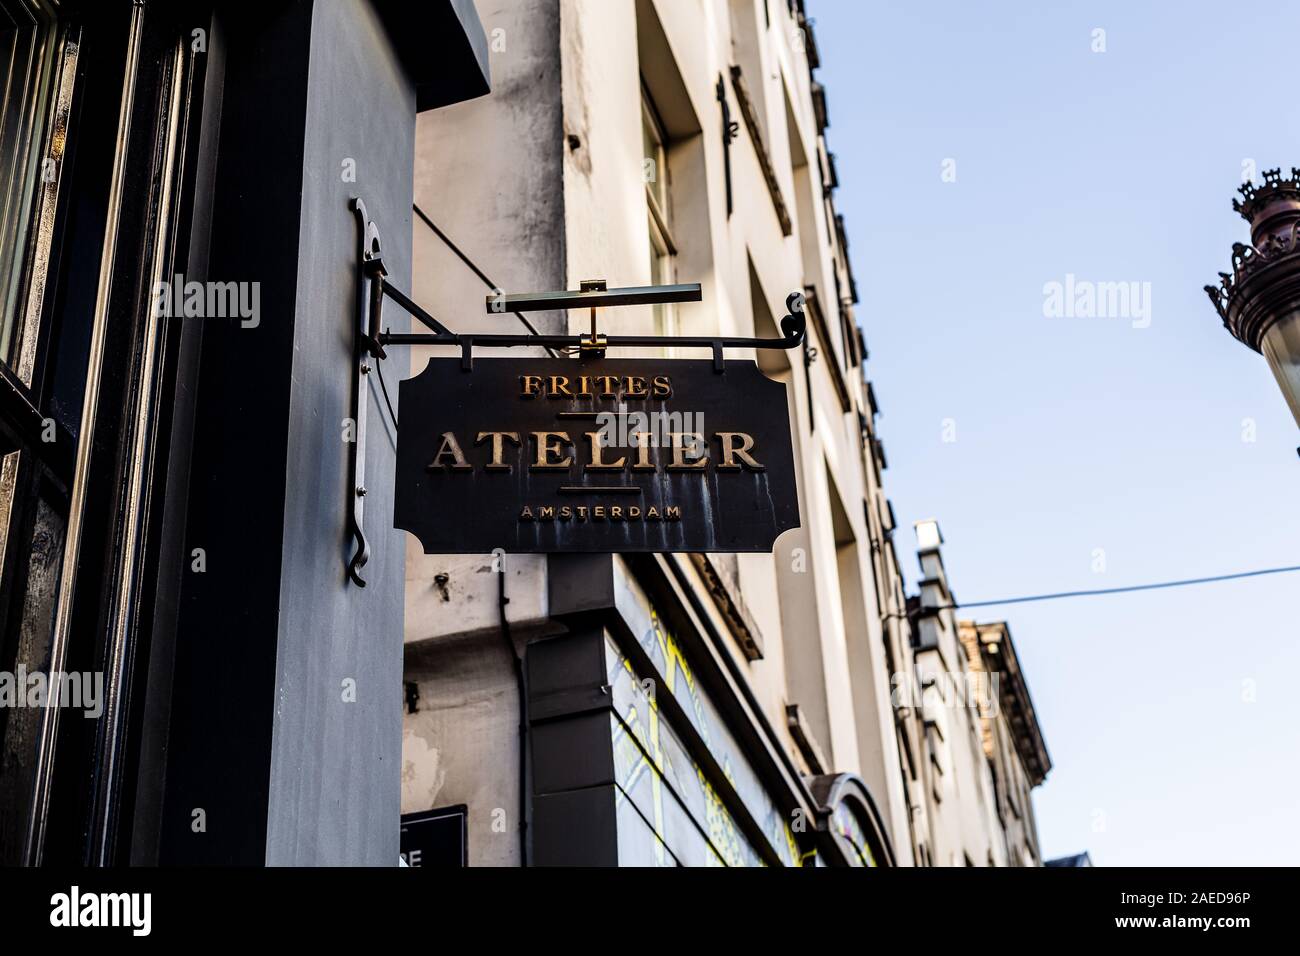 Restaurant sign on a city street storefront, Brussels, Belgium Stock Photo